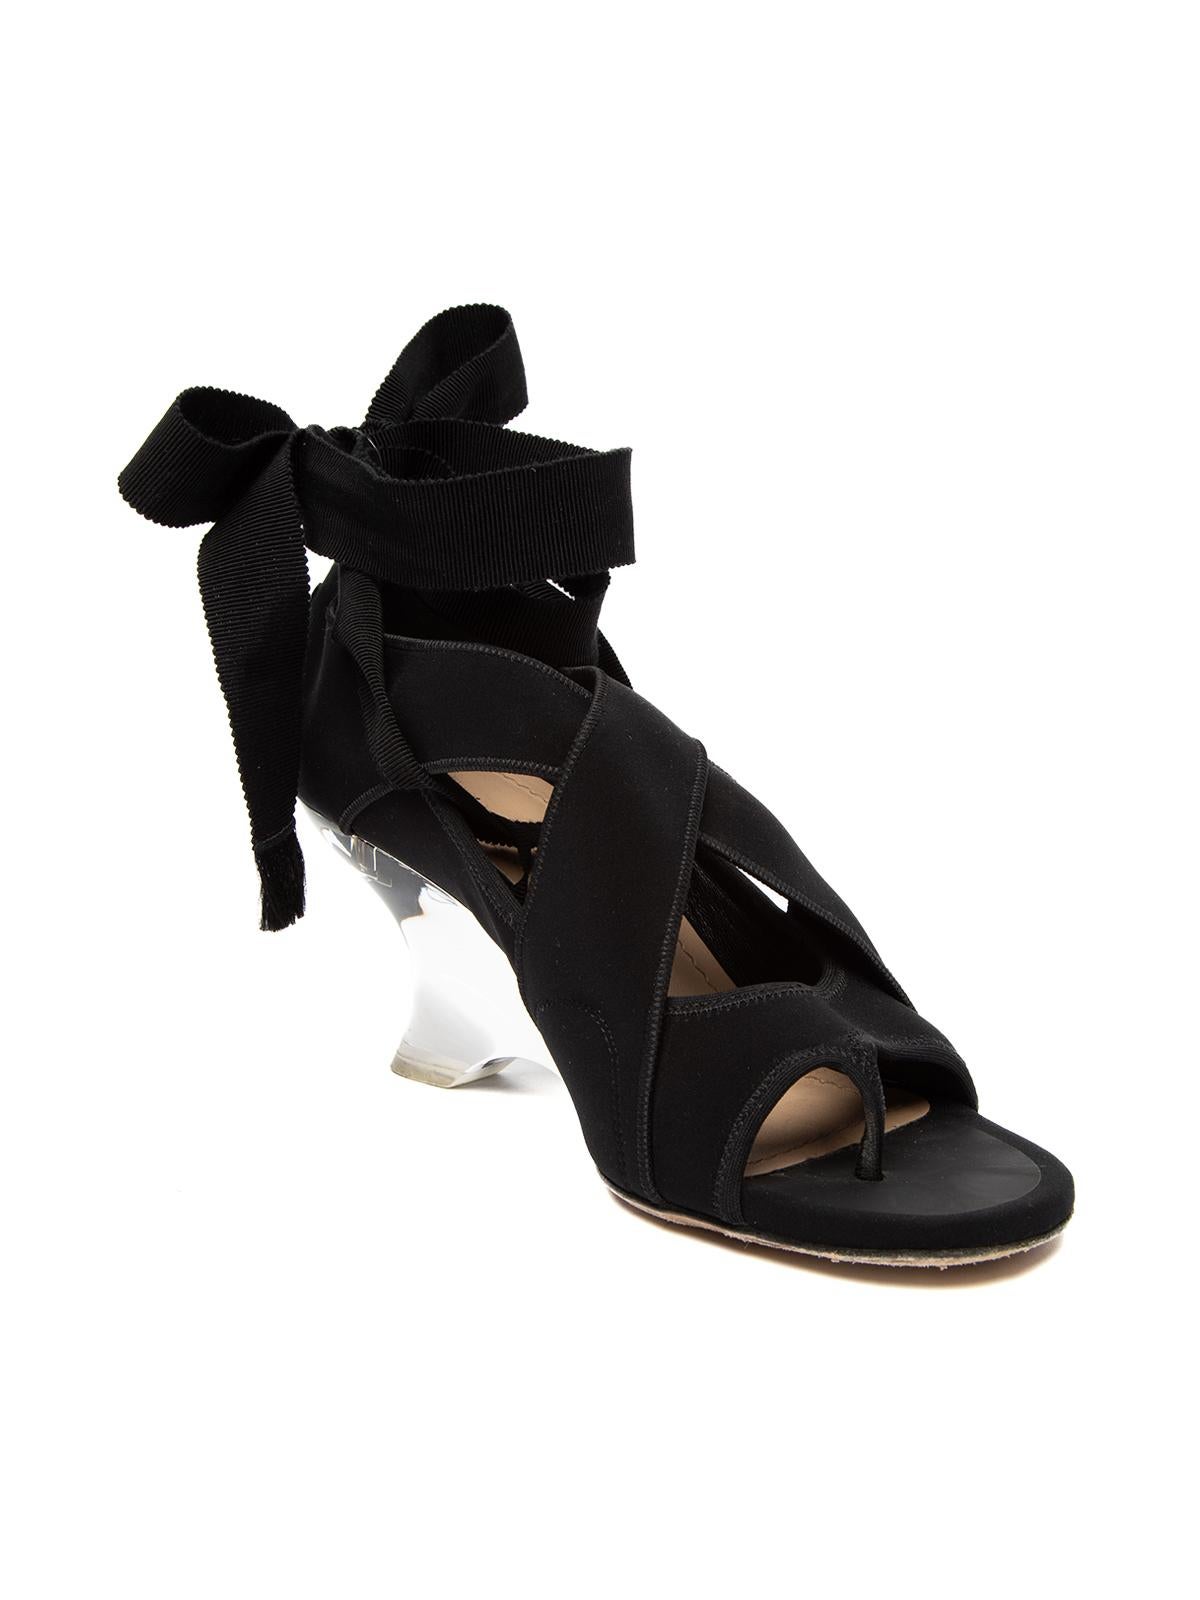 CONDITION is Very good. Very minor wear to shoes is evident. Moderate wear to outsoles on this used Christian Dior designer resale item. Details Colour - black Material - (feels like: spandex/nylon) Style - wedge Toe style - peep-toe Straps/